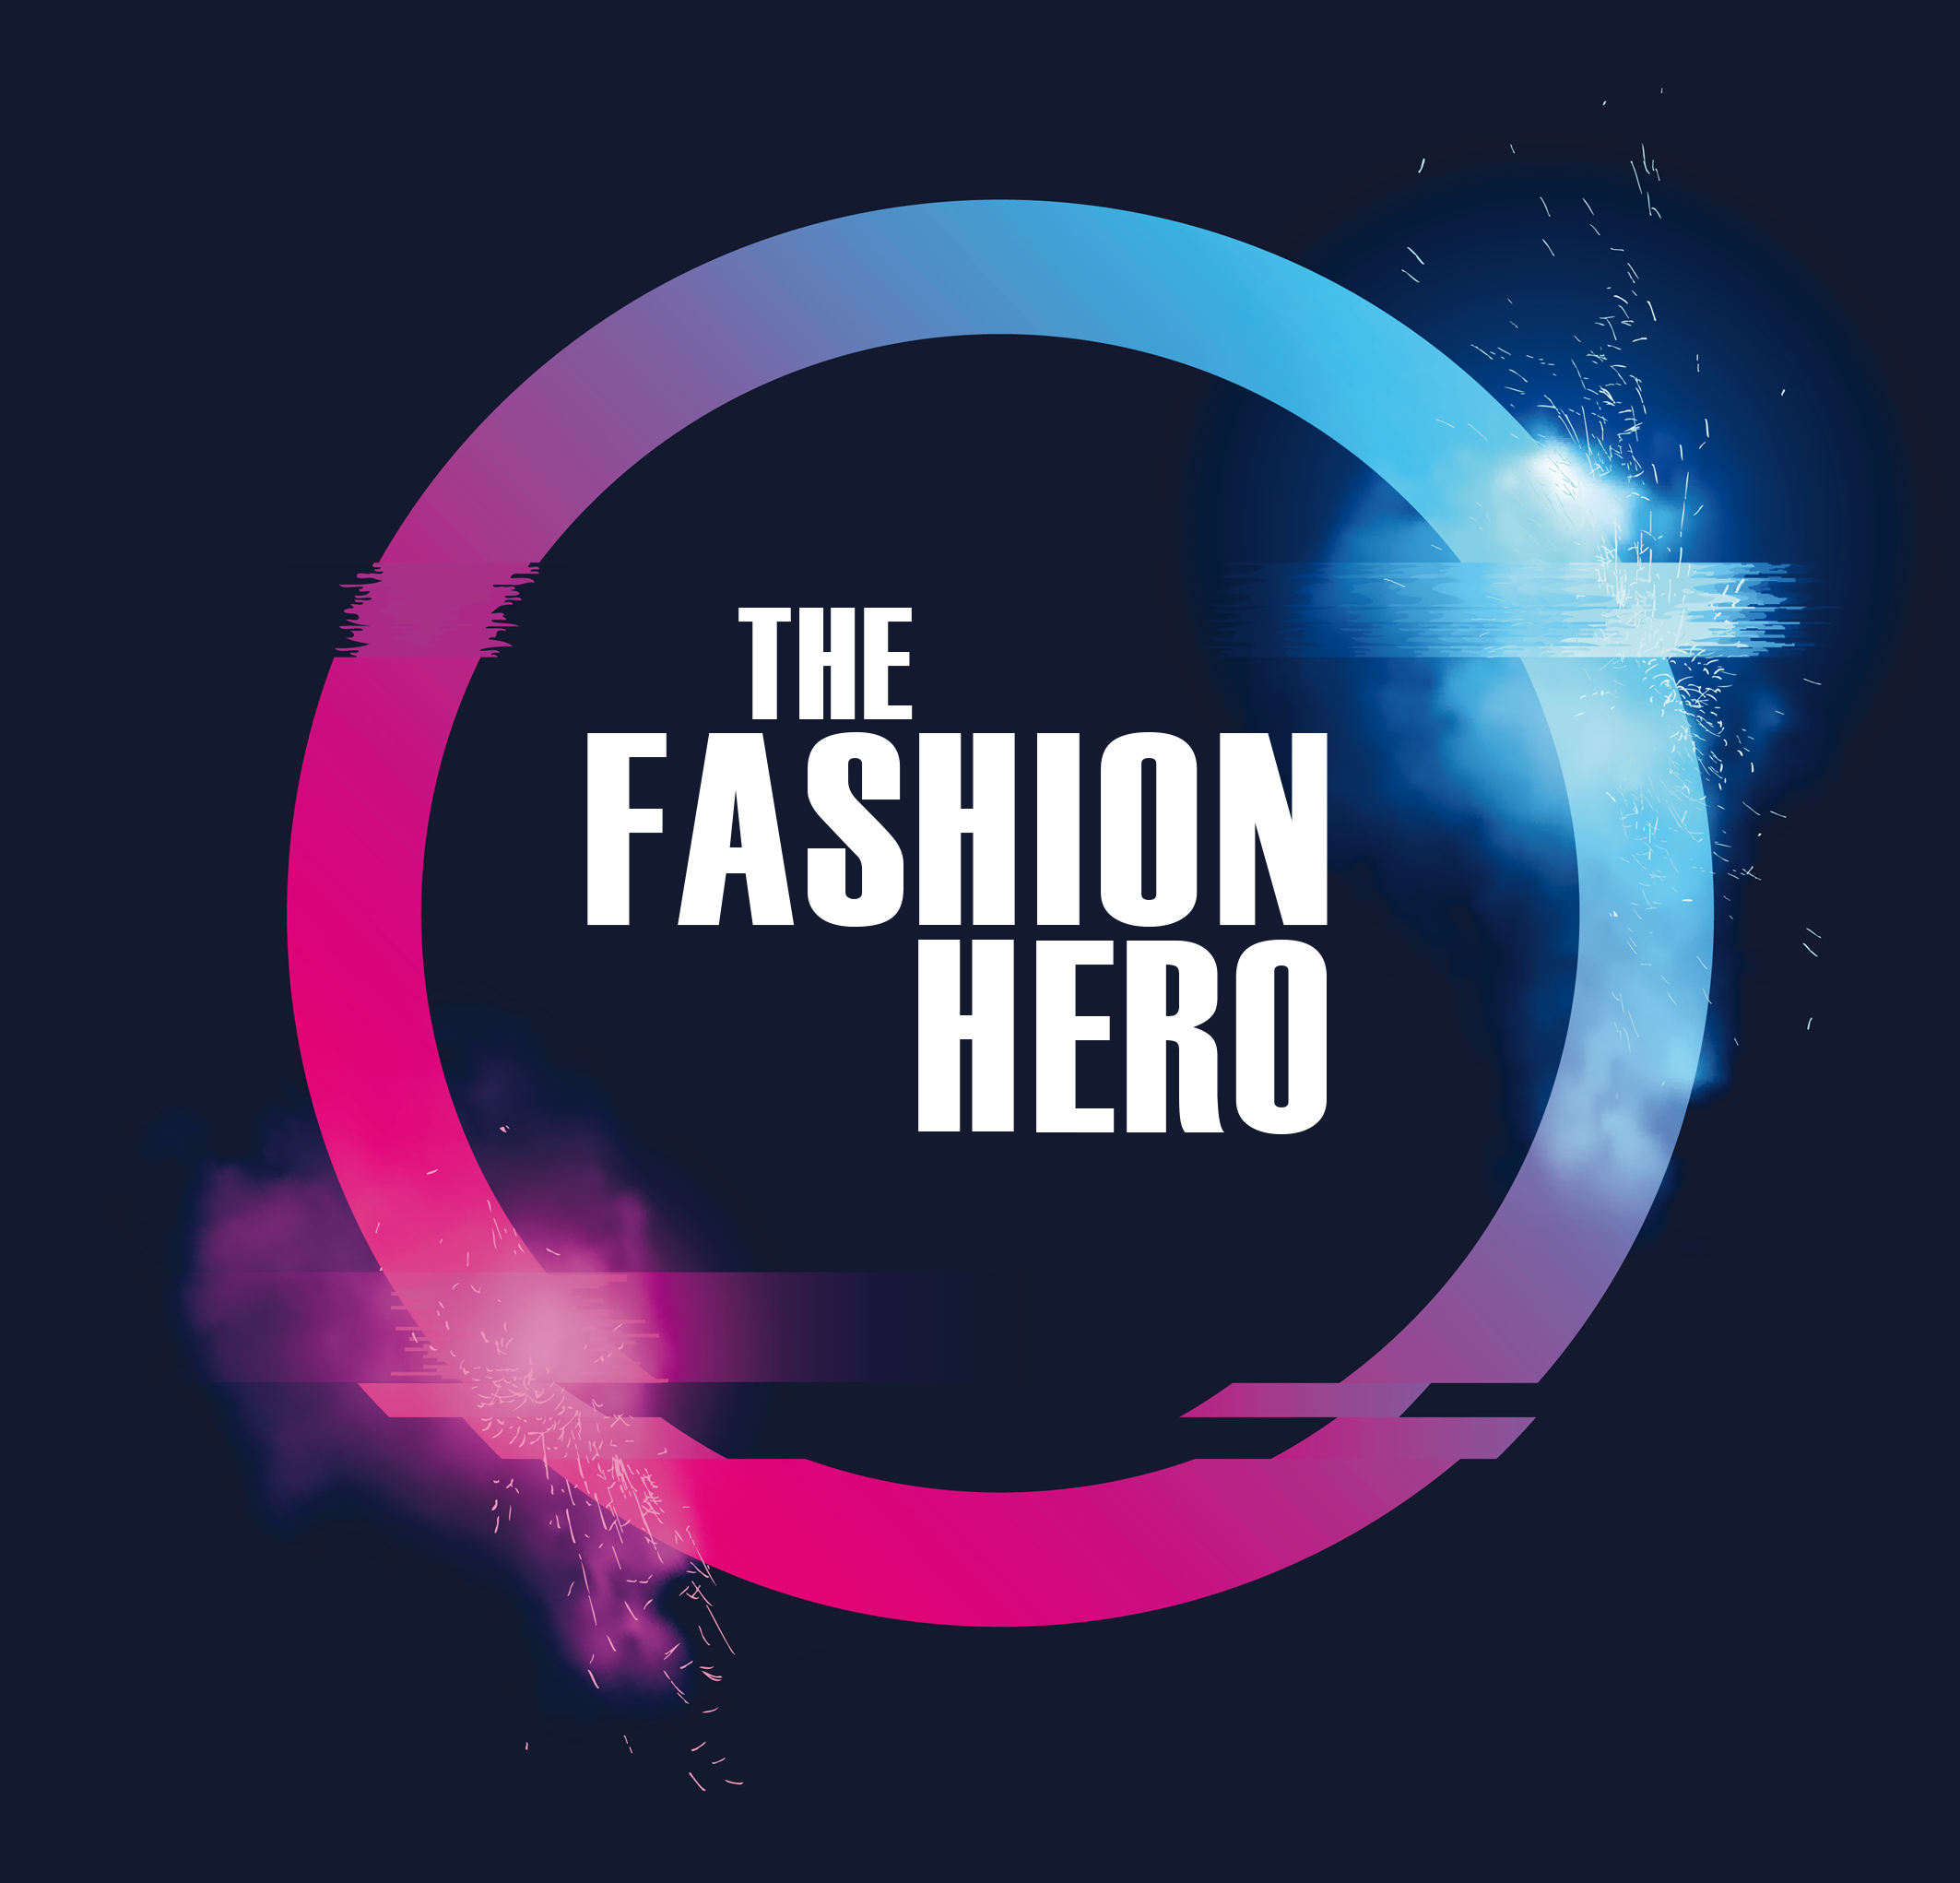 The Fashion Hero The Newest Tv Series Casting Real People As Role Models Opportunity Artconnect